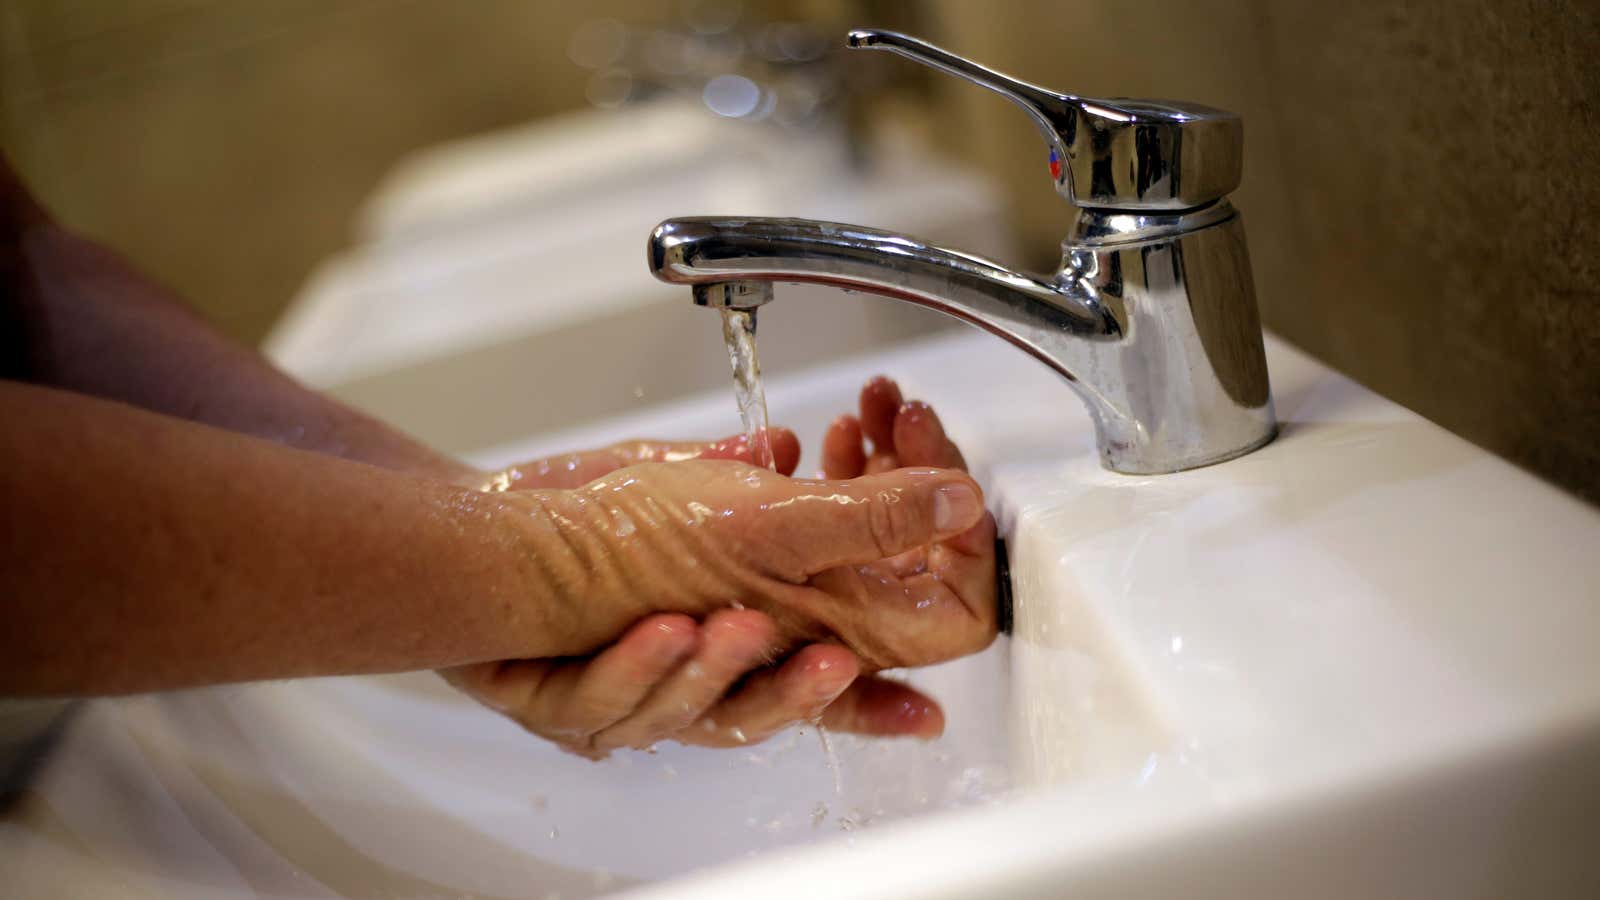 You should spend 20 seconds washing and drying your hands.